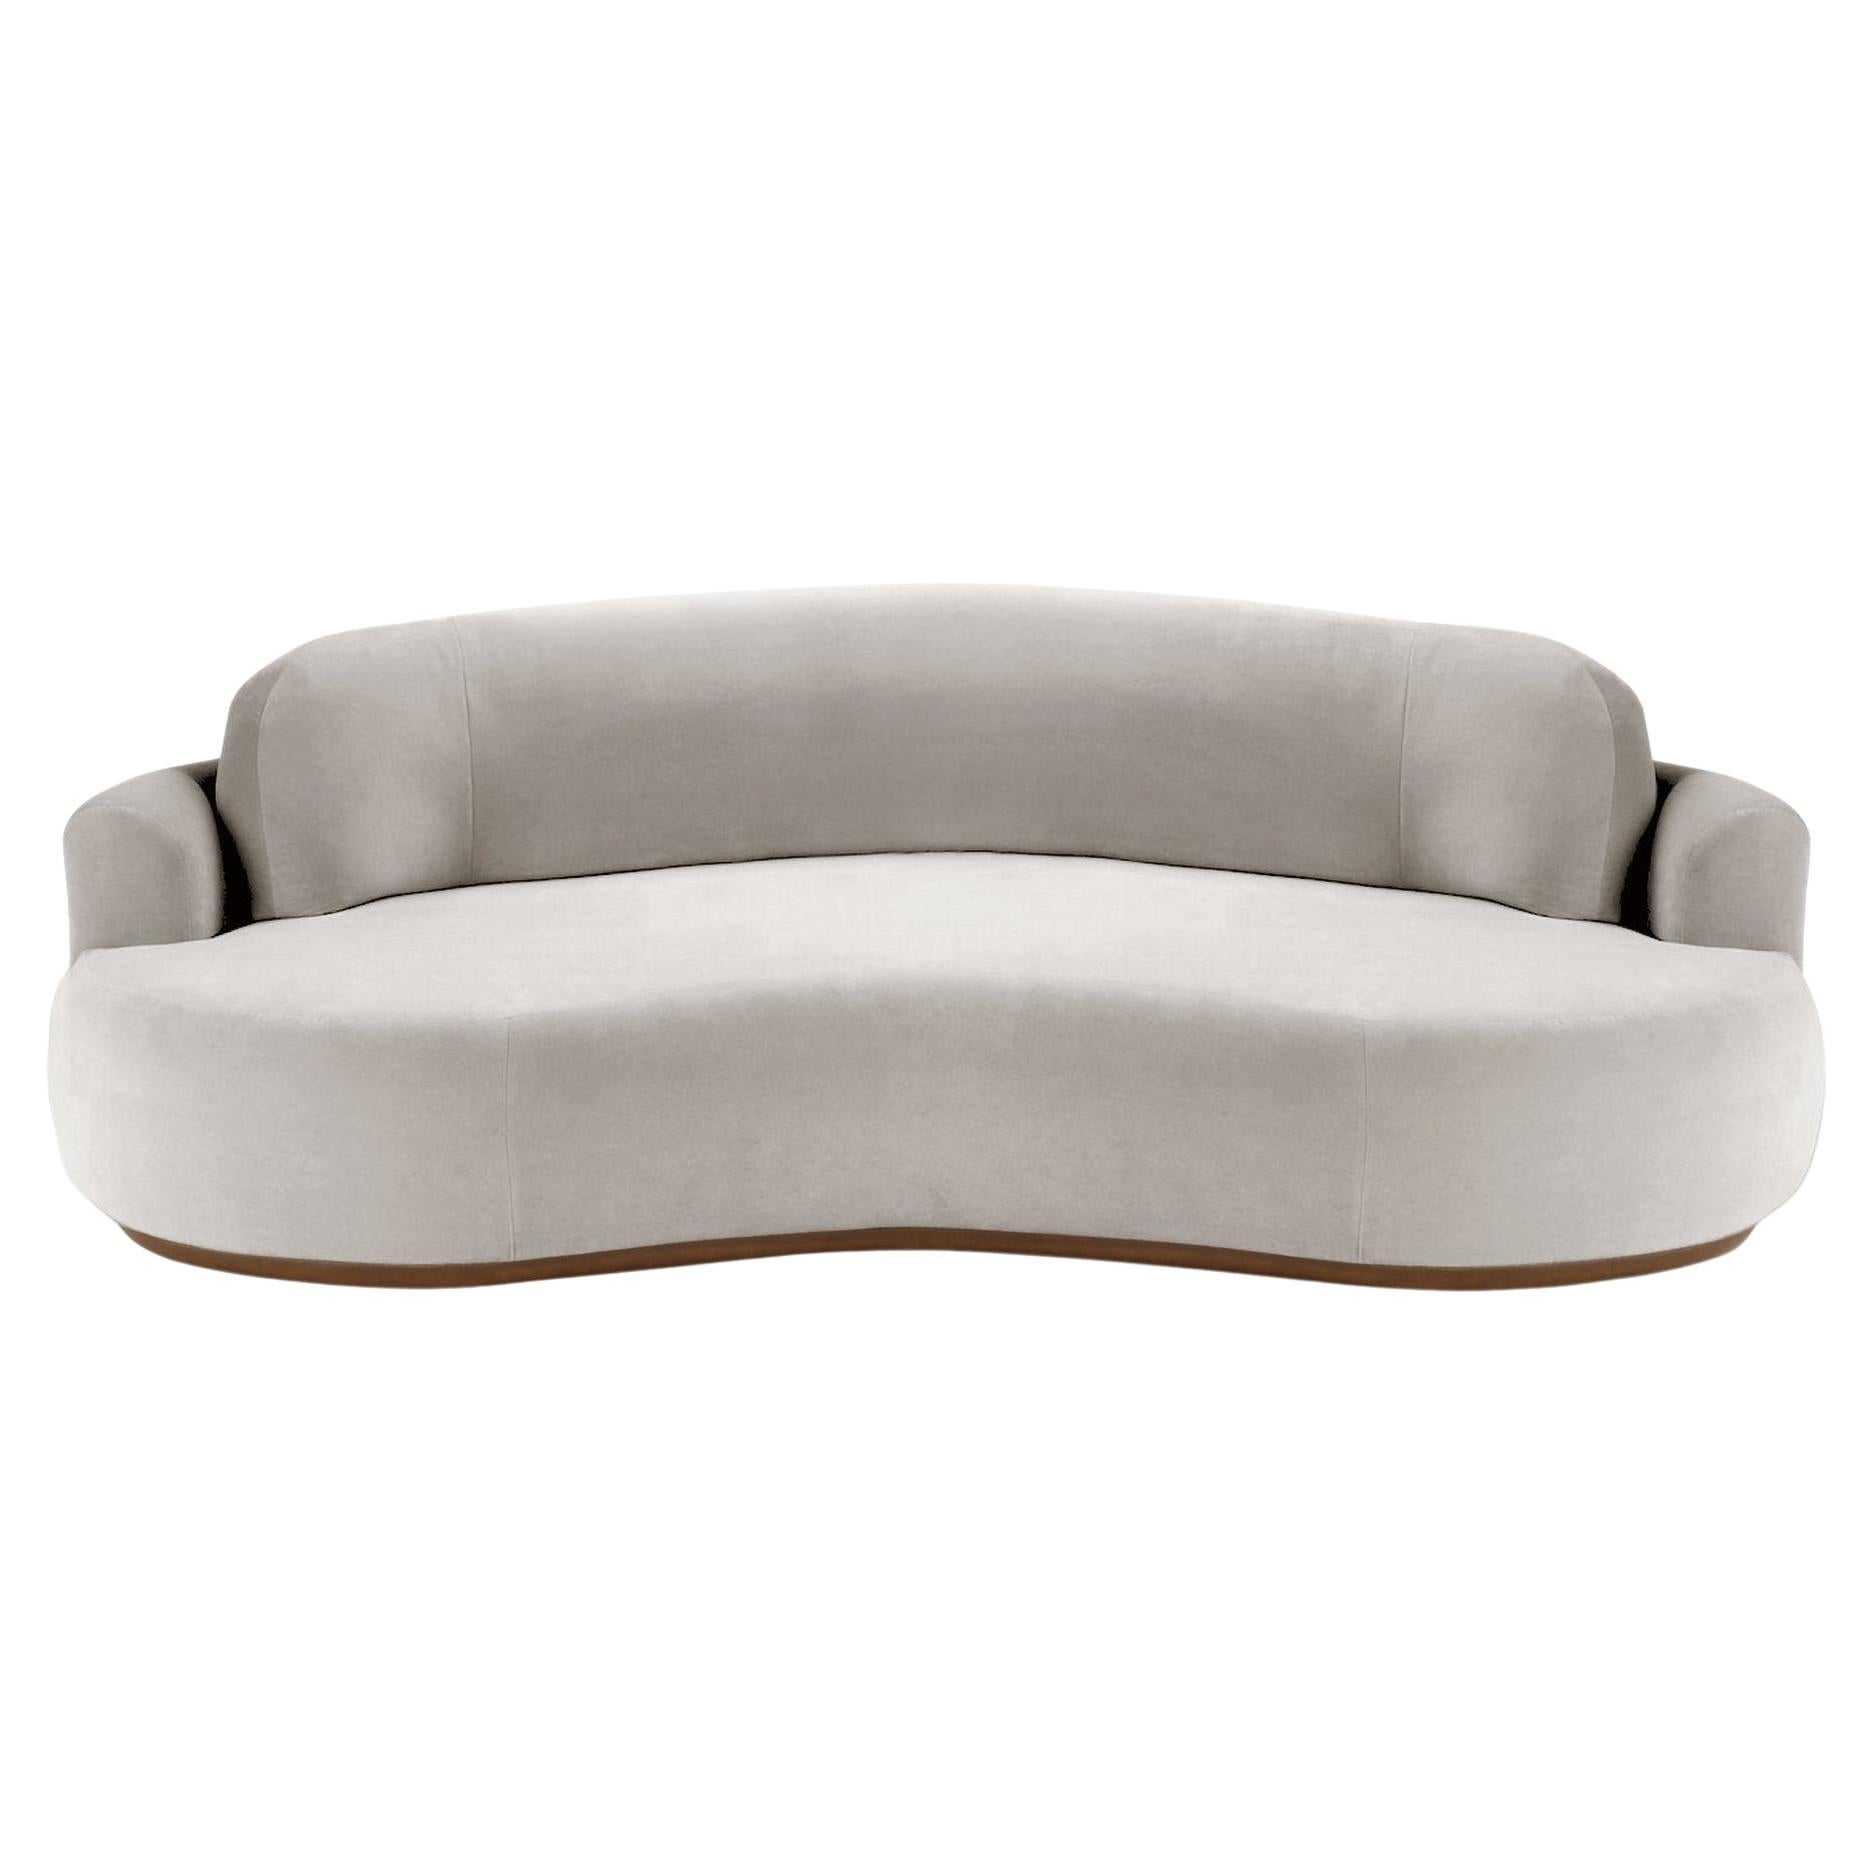 Naked Round Sofa, Medium with Beech Ash-056-1 and Paris Mouse For Sale